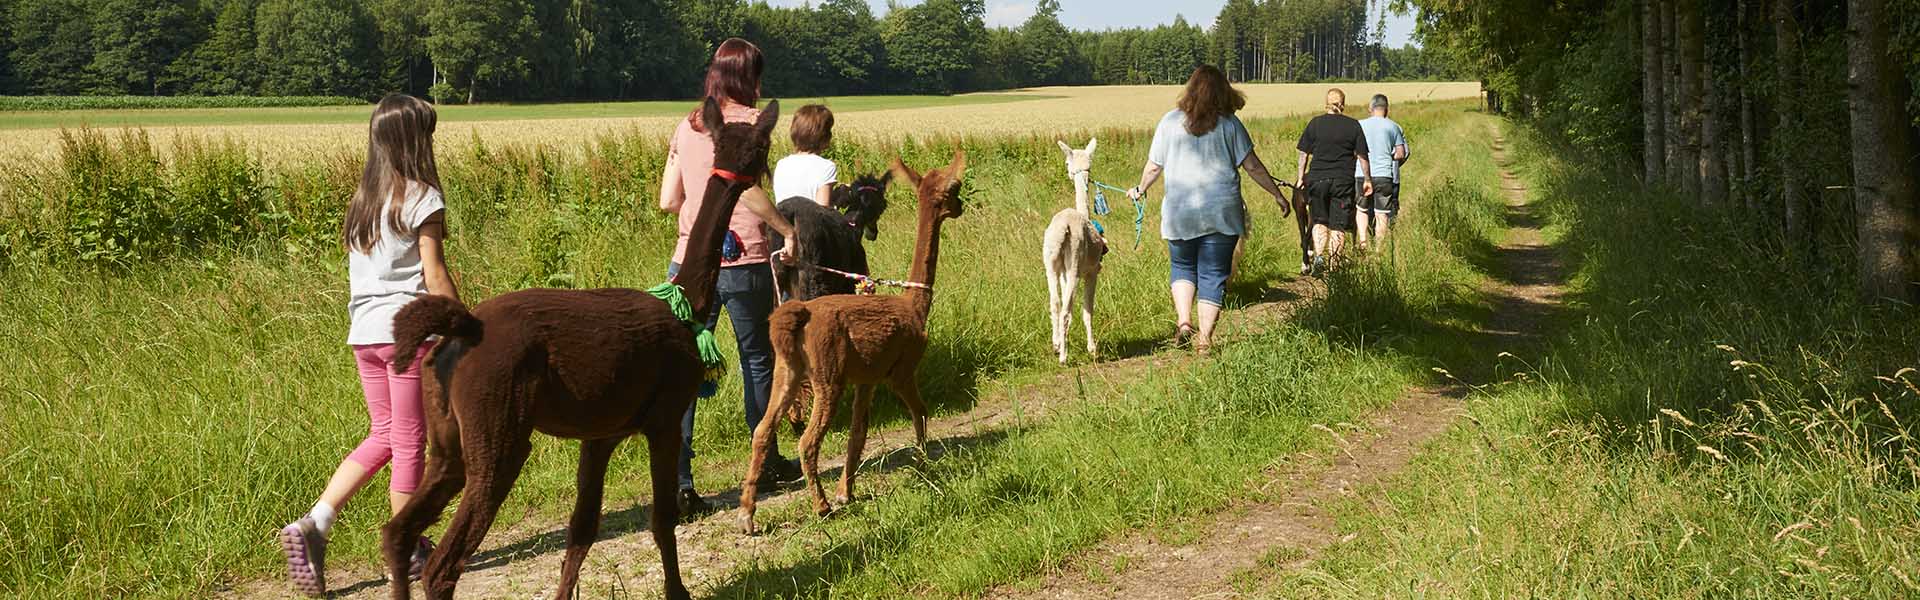 Walking in the countryside with Alpacas